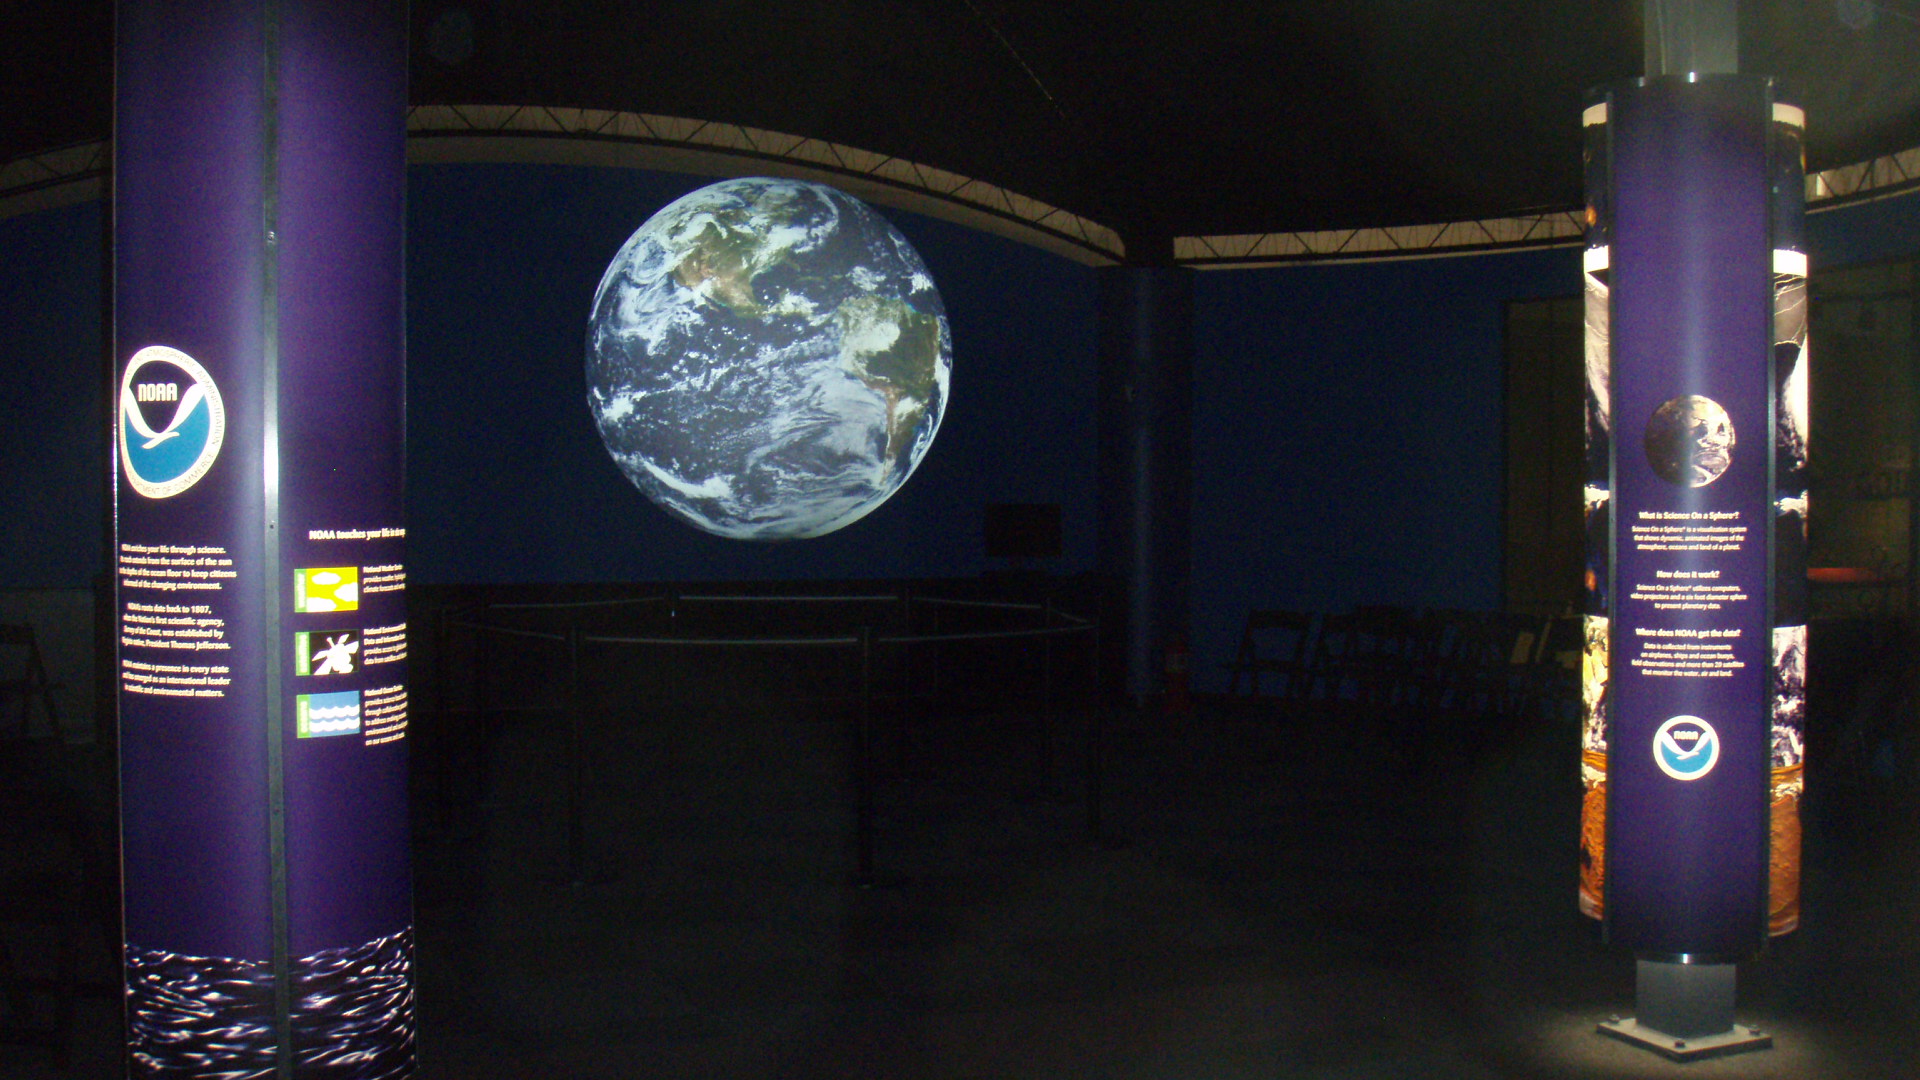 Science On a Sphere displays satellite imagery of Earth in an empty room. In the foreground are two pillars showing the NOAA logo and some explanatory text